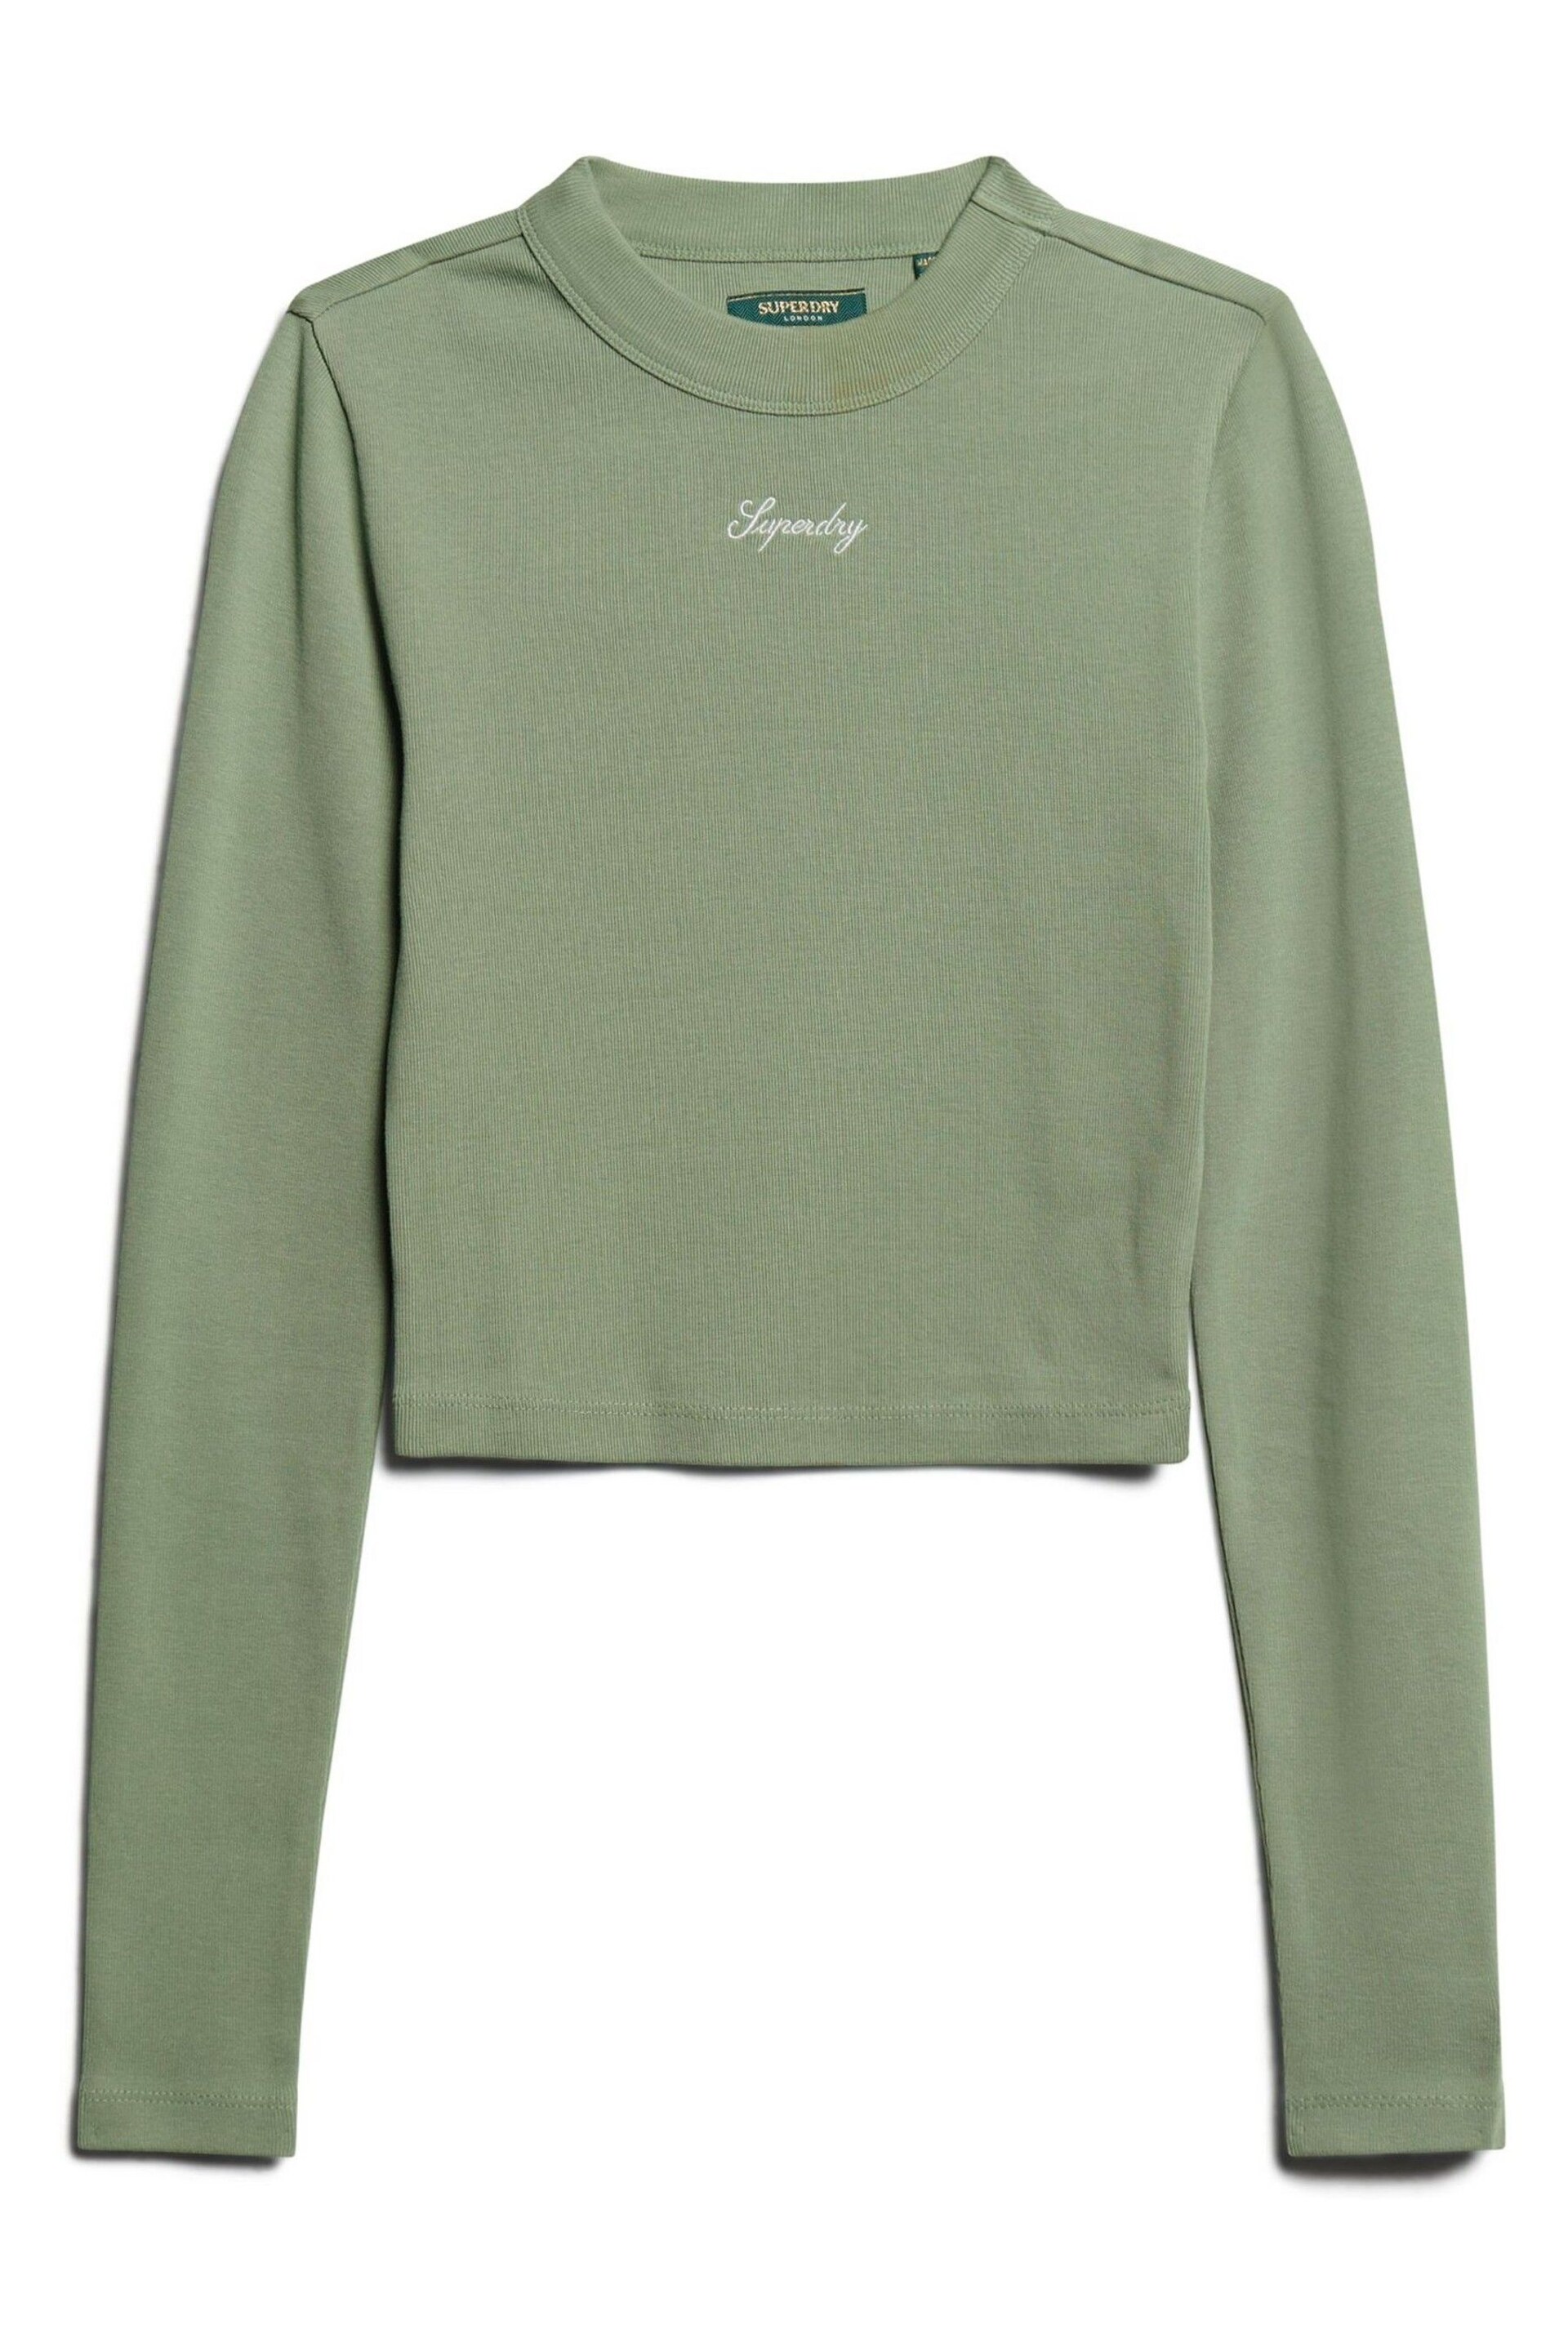 Superdry Light Green Rib Long Sleeve Fitted Top - Image 4 of 6